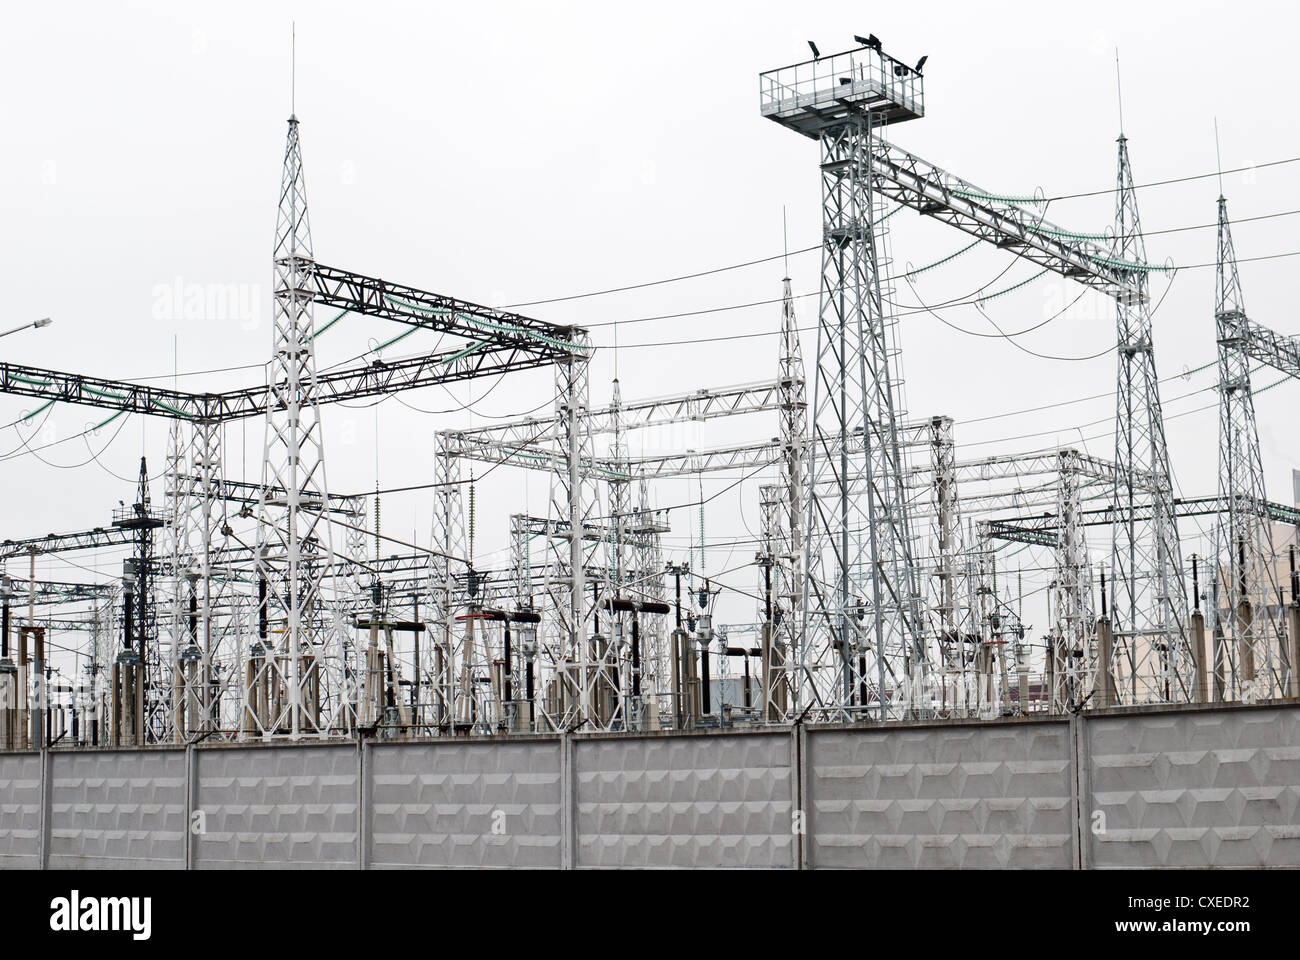 Power plant - transformation station. Multitude of cables and wires. Stock Photo